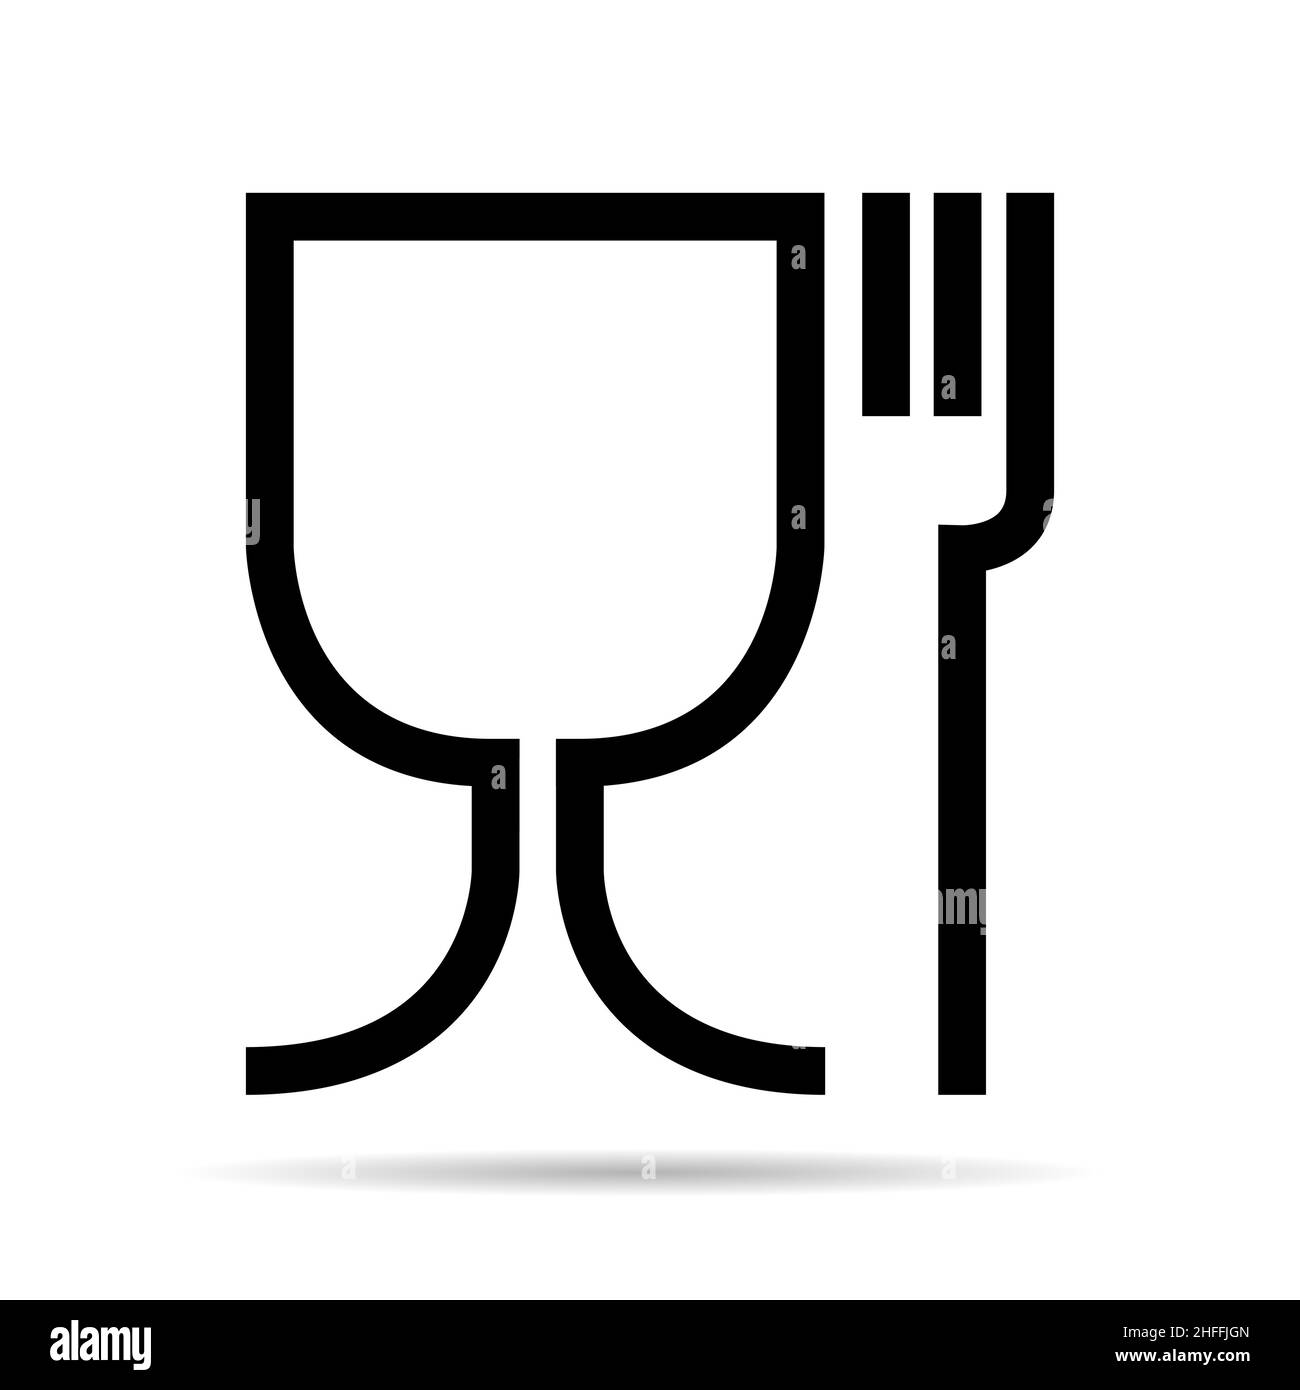 Food safe symbol. The international icon for food safe material, wine glass and a fork symbol . Stock Vector